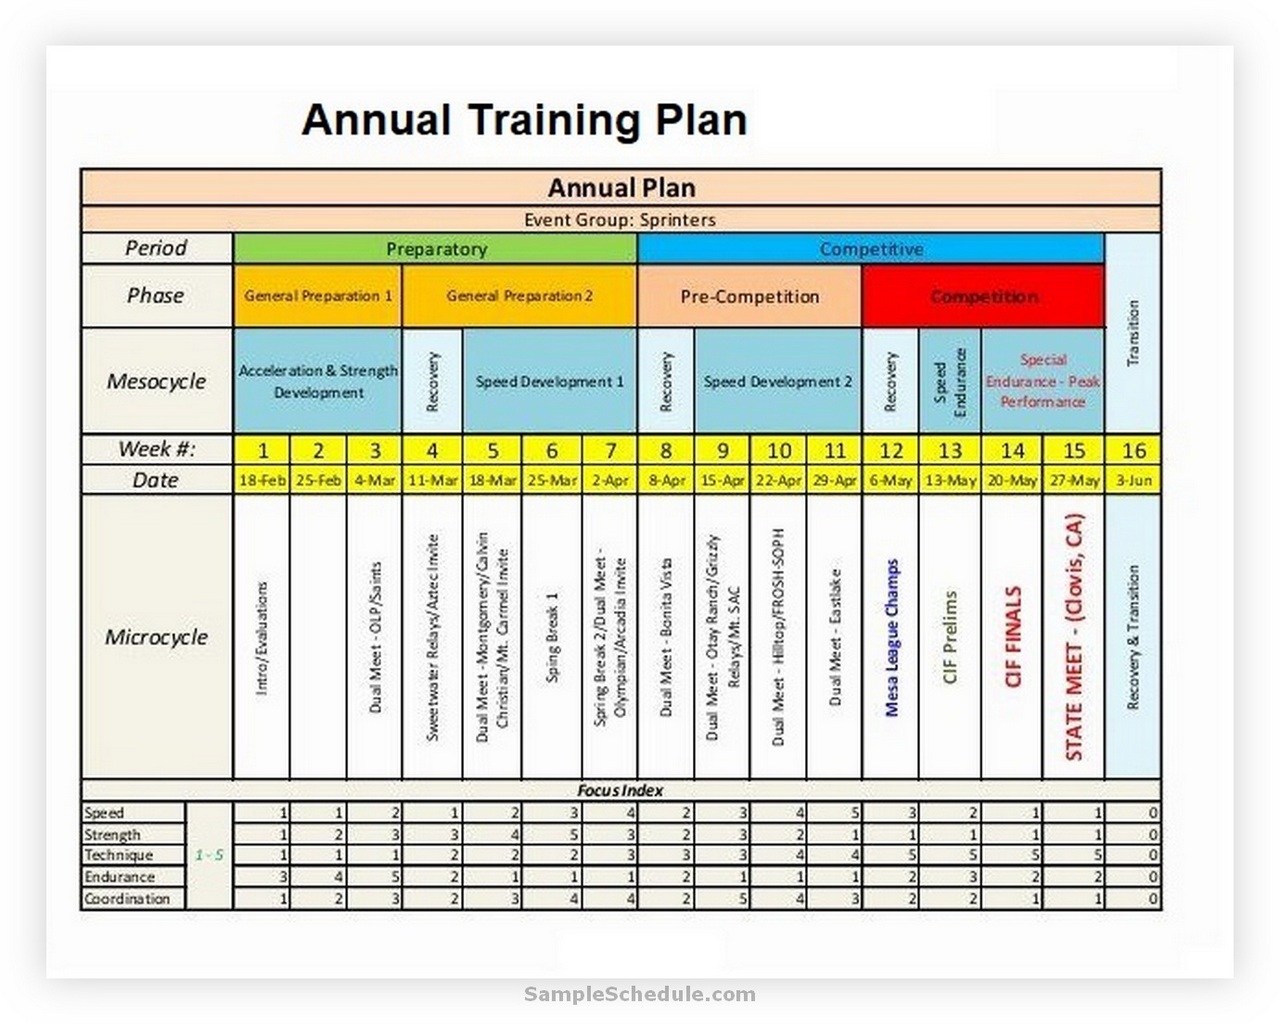 15+ Best Annual Training Plan Template [Excel, Word & PDF] sample